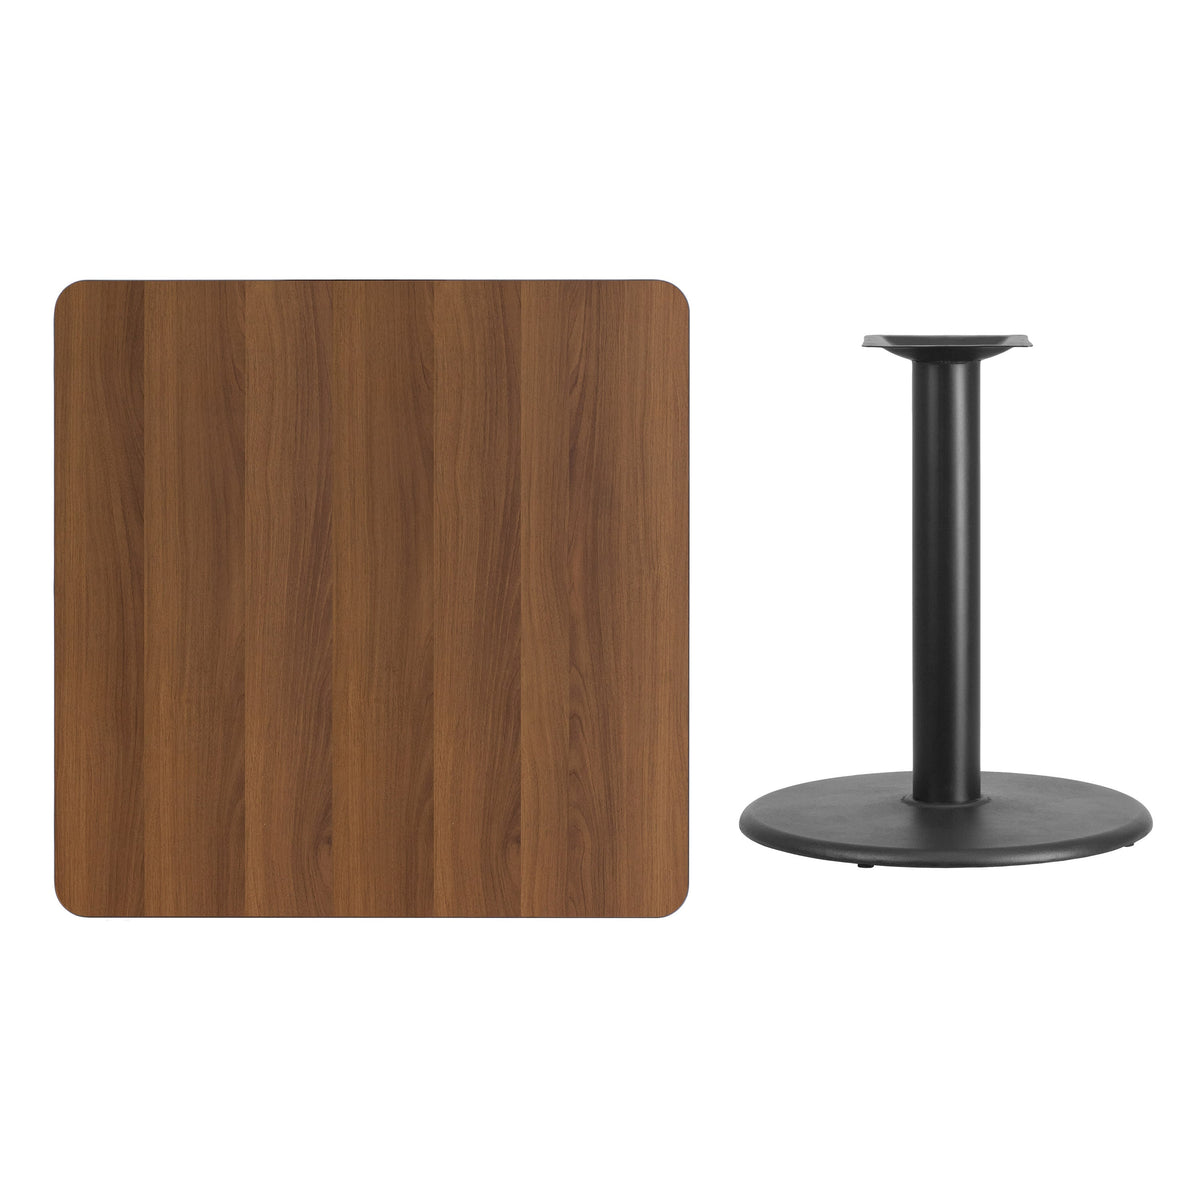 Walnut |#| 36inch Square Walnut Laminate Table Top with 24inch Round Table Height Base